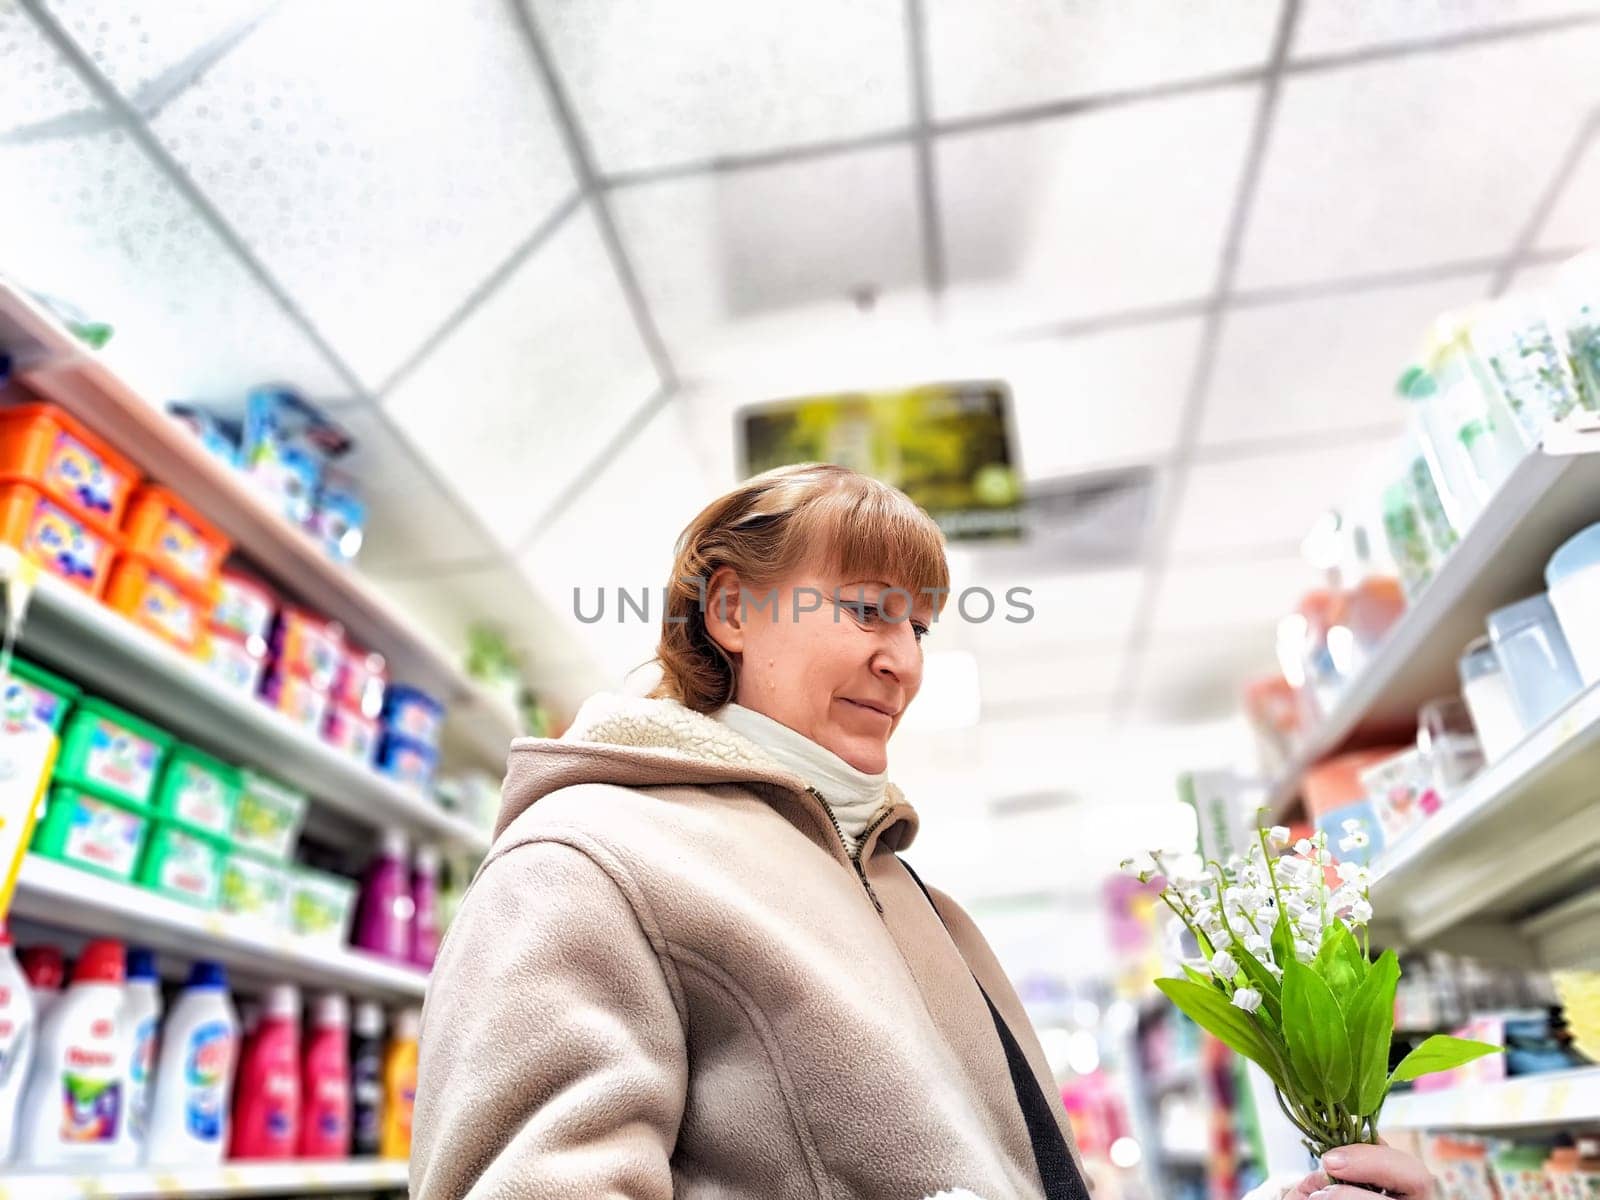 Middle-Aged Woman Shopping for Care Products at a Cosmetics Store. A woman browsing care products in well-stocked cosmetics aisle